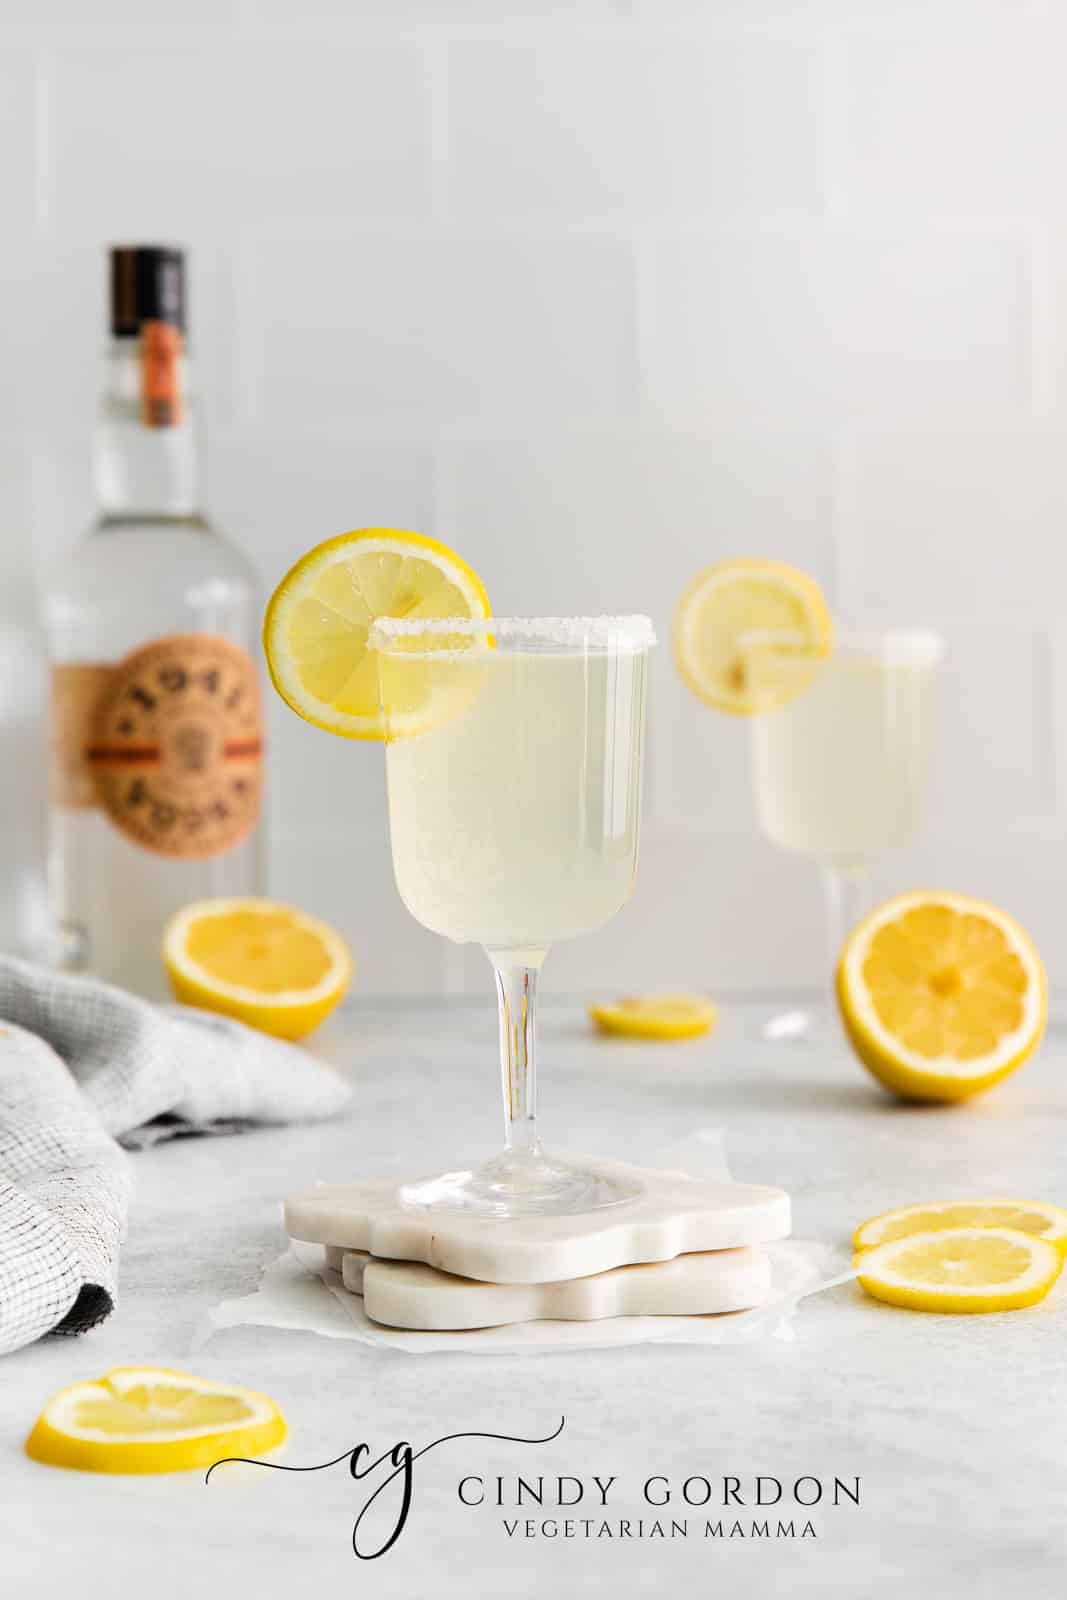 two clear glasses filed with off white/yellow liquid with lemon wheel on top. Lemon wheels on surface and grey cloth to left with vodka bottle in back left